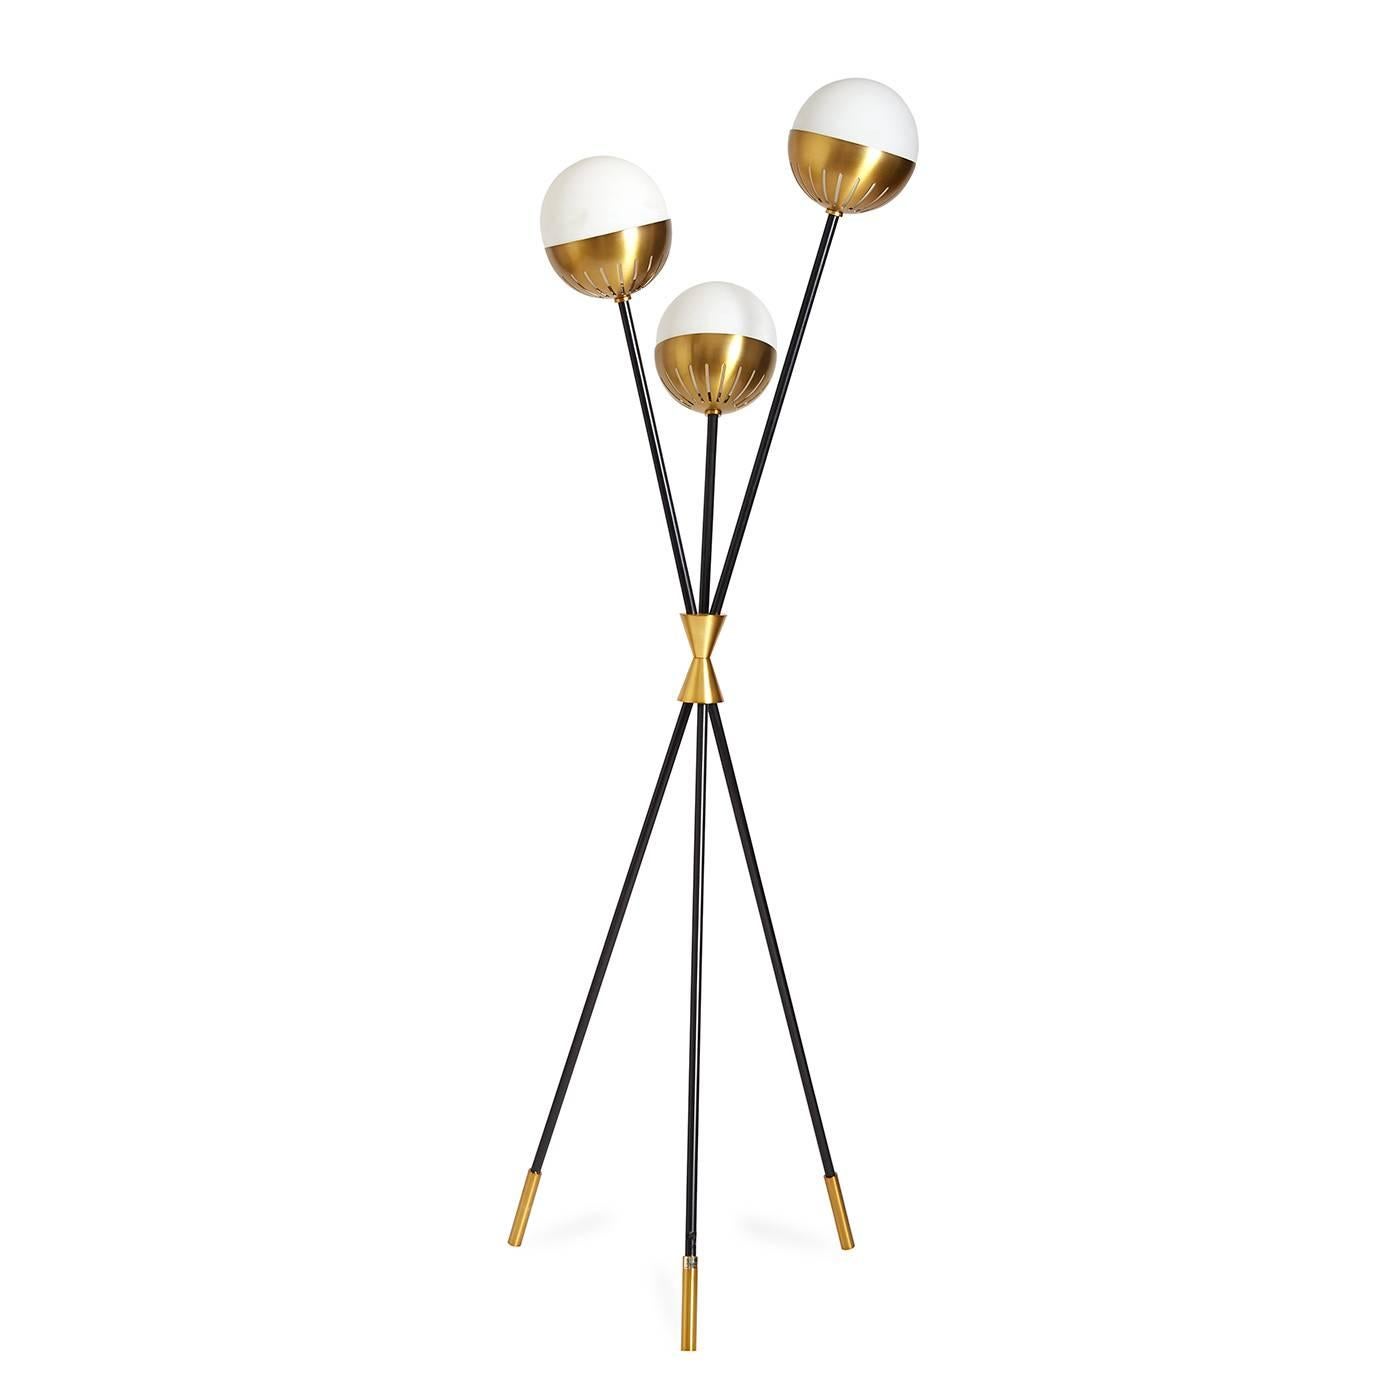 Kinetic modernism. Divinely dynamic, the Caracas tripod floor lamp is light and airy—but with a strong presence. Blackened metal stems of differing heights are gathered with a bowtie cuff in antique brass. Each stem supports a softly glowing milk